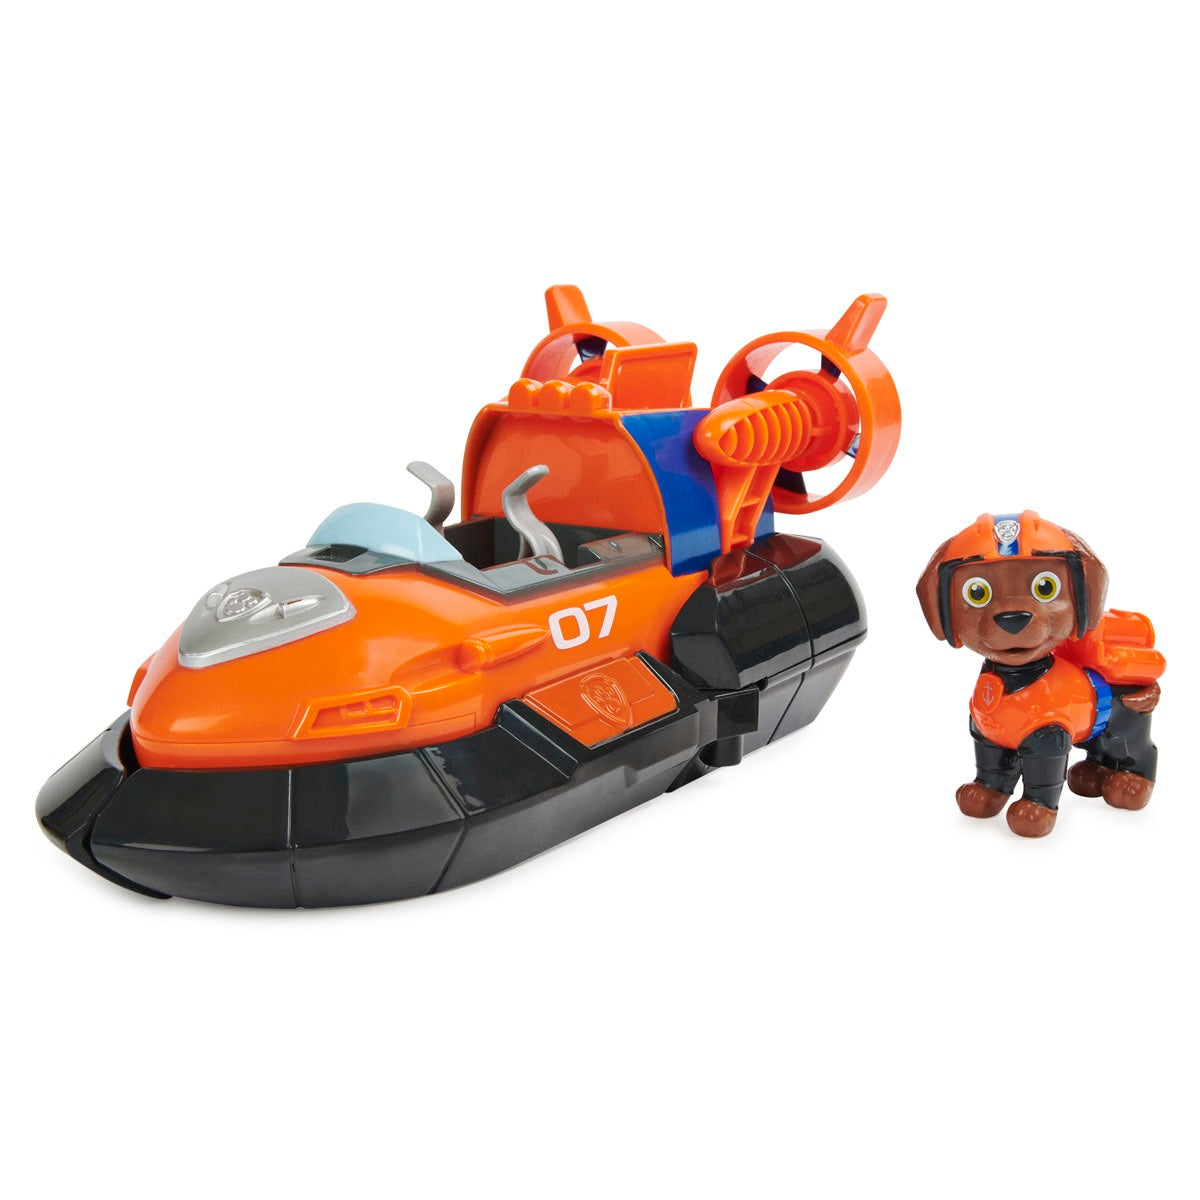 Paw Patrol: The Movie Deluxe Vehicle & Pup Figure (Styles Vary - One Supplied)